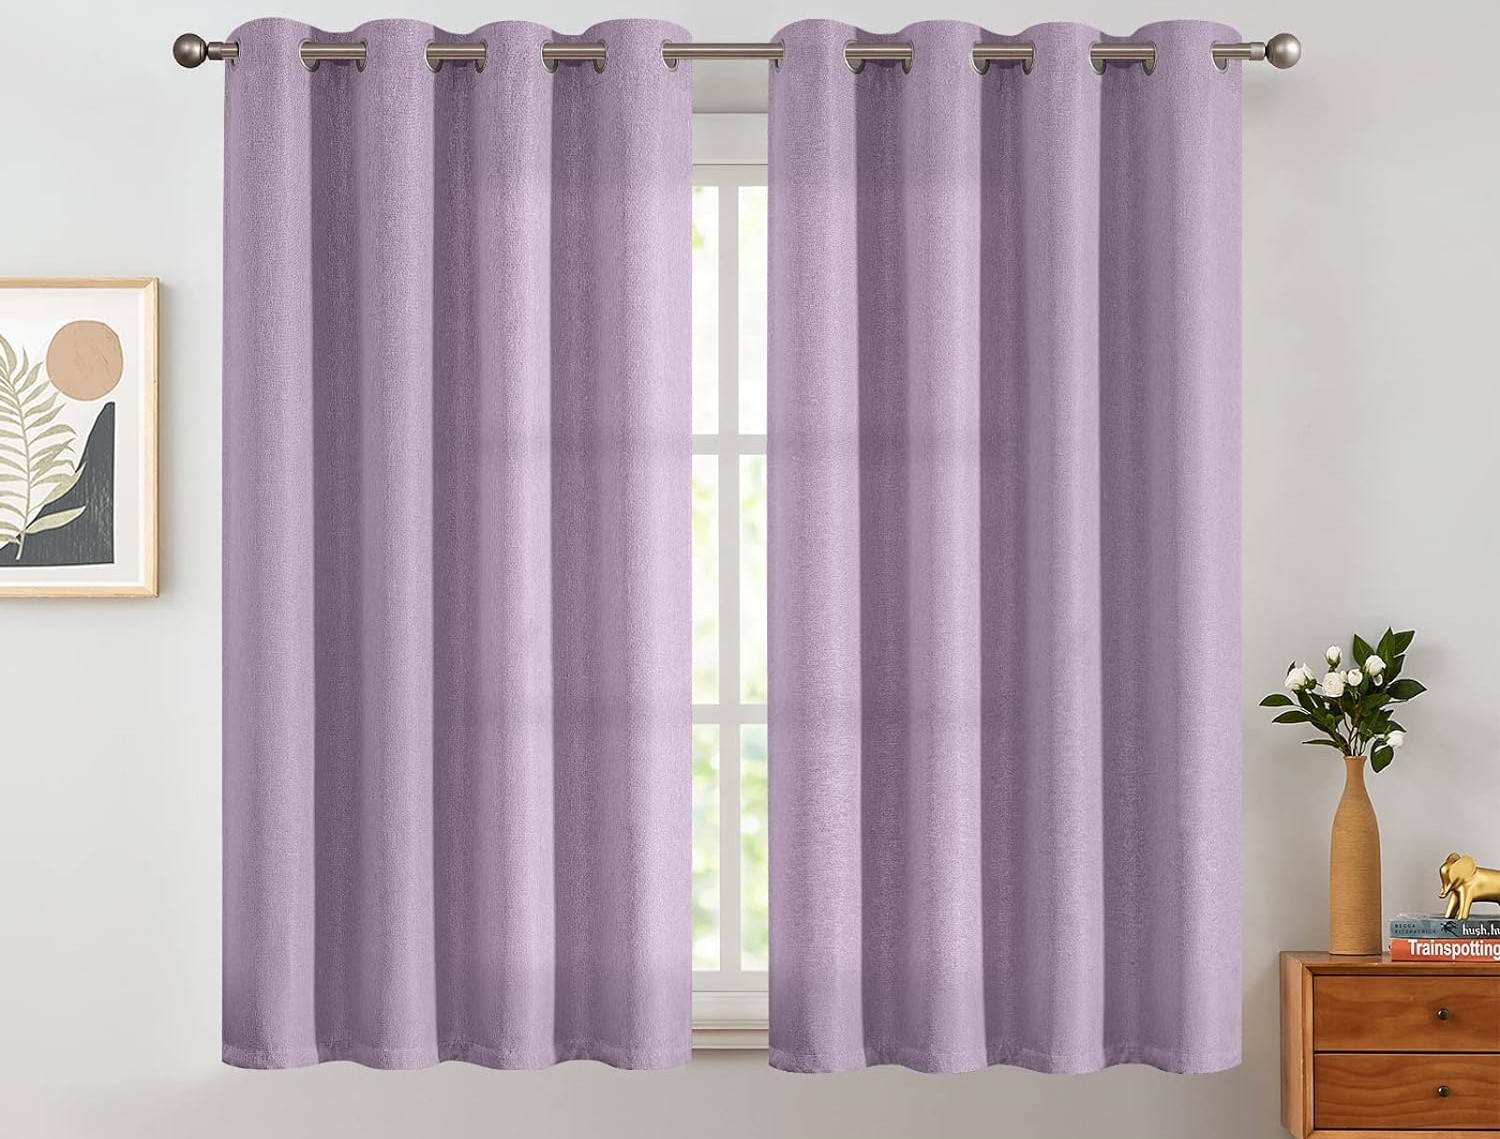 What Size Curtains Do I Need For A 72 Inch Window